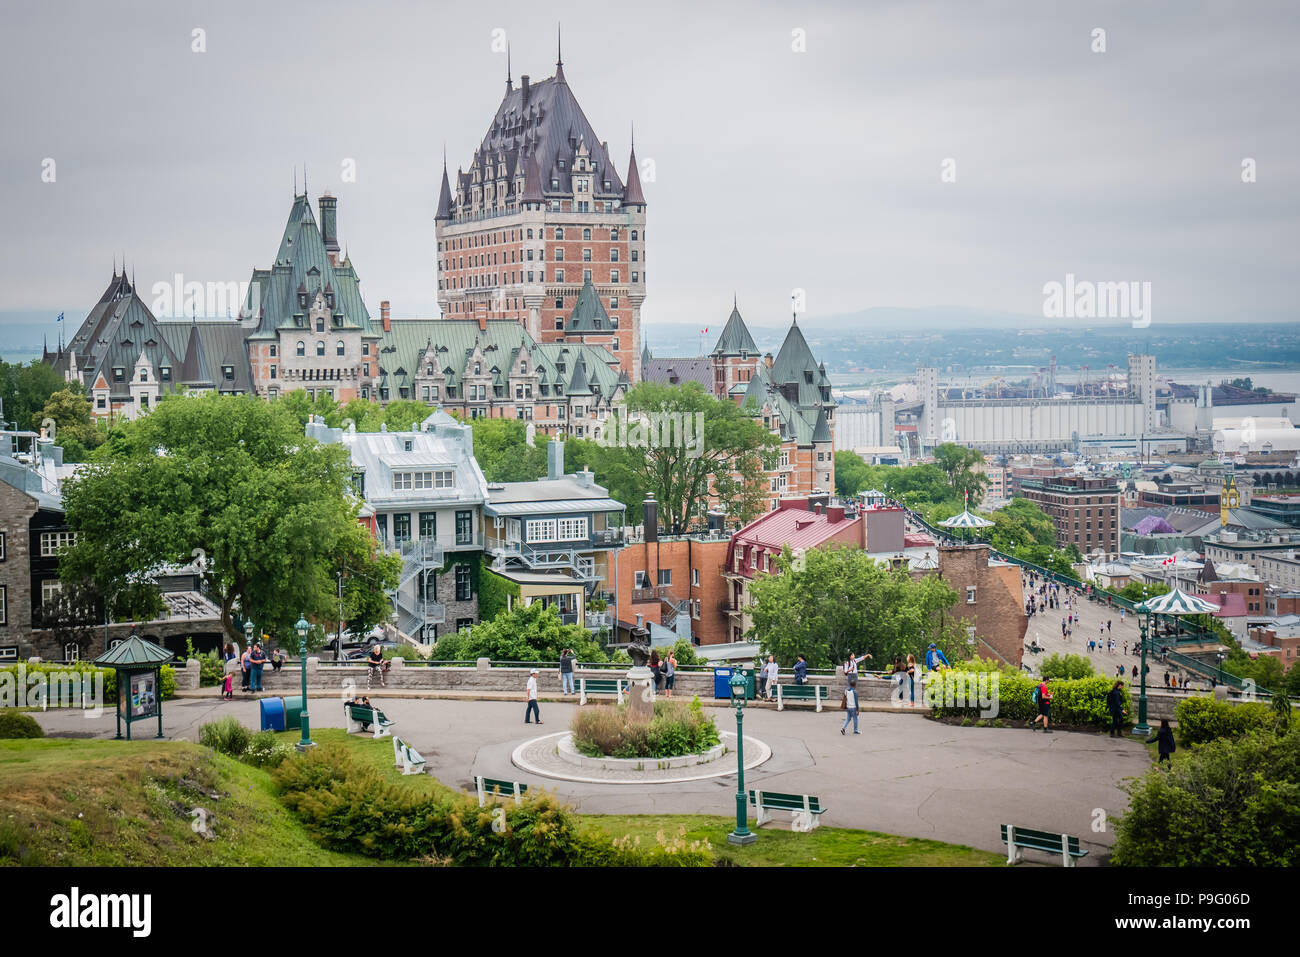 famous historic landmark hotel Chateau Frontenac in Quebec City Canada Stock Photo